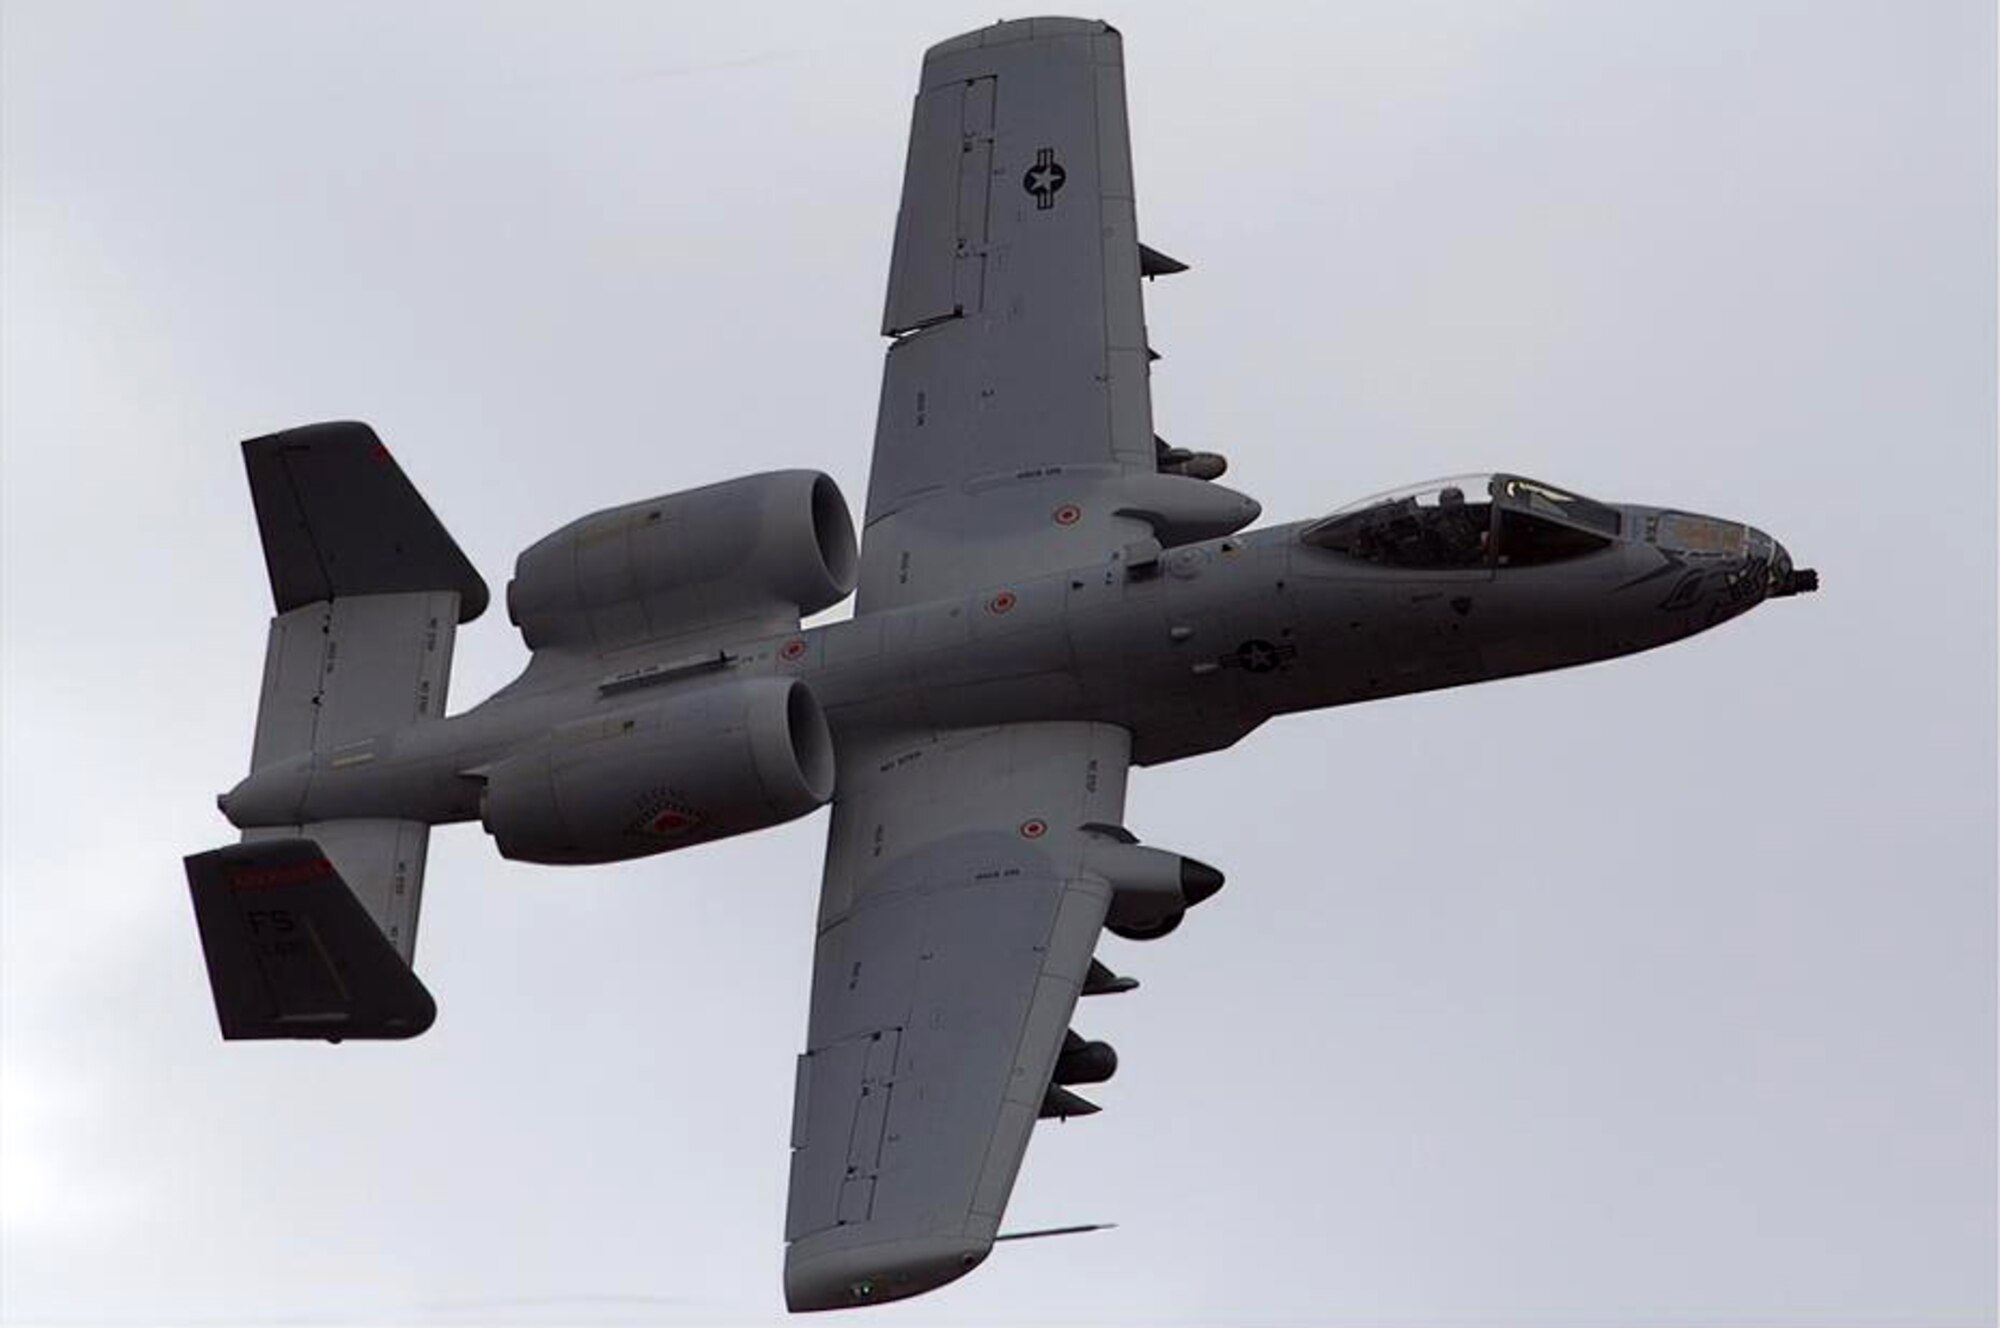 A 188th Fighter Wing A-10C Thunderbolt II "Warthog" trains over Detachment 1 Razorback Range, Fort Chaffee Maneuver Training Center, Ark., December 2013. (Photo courtesy of Nick Thomas)
